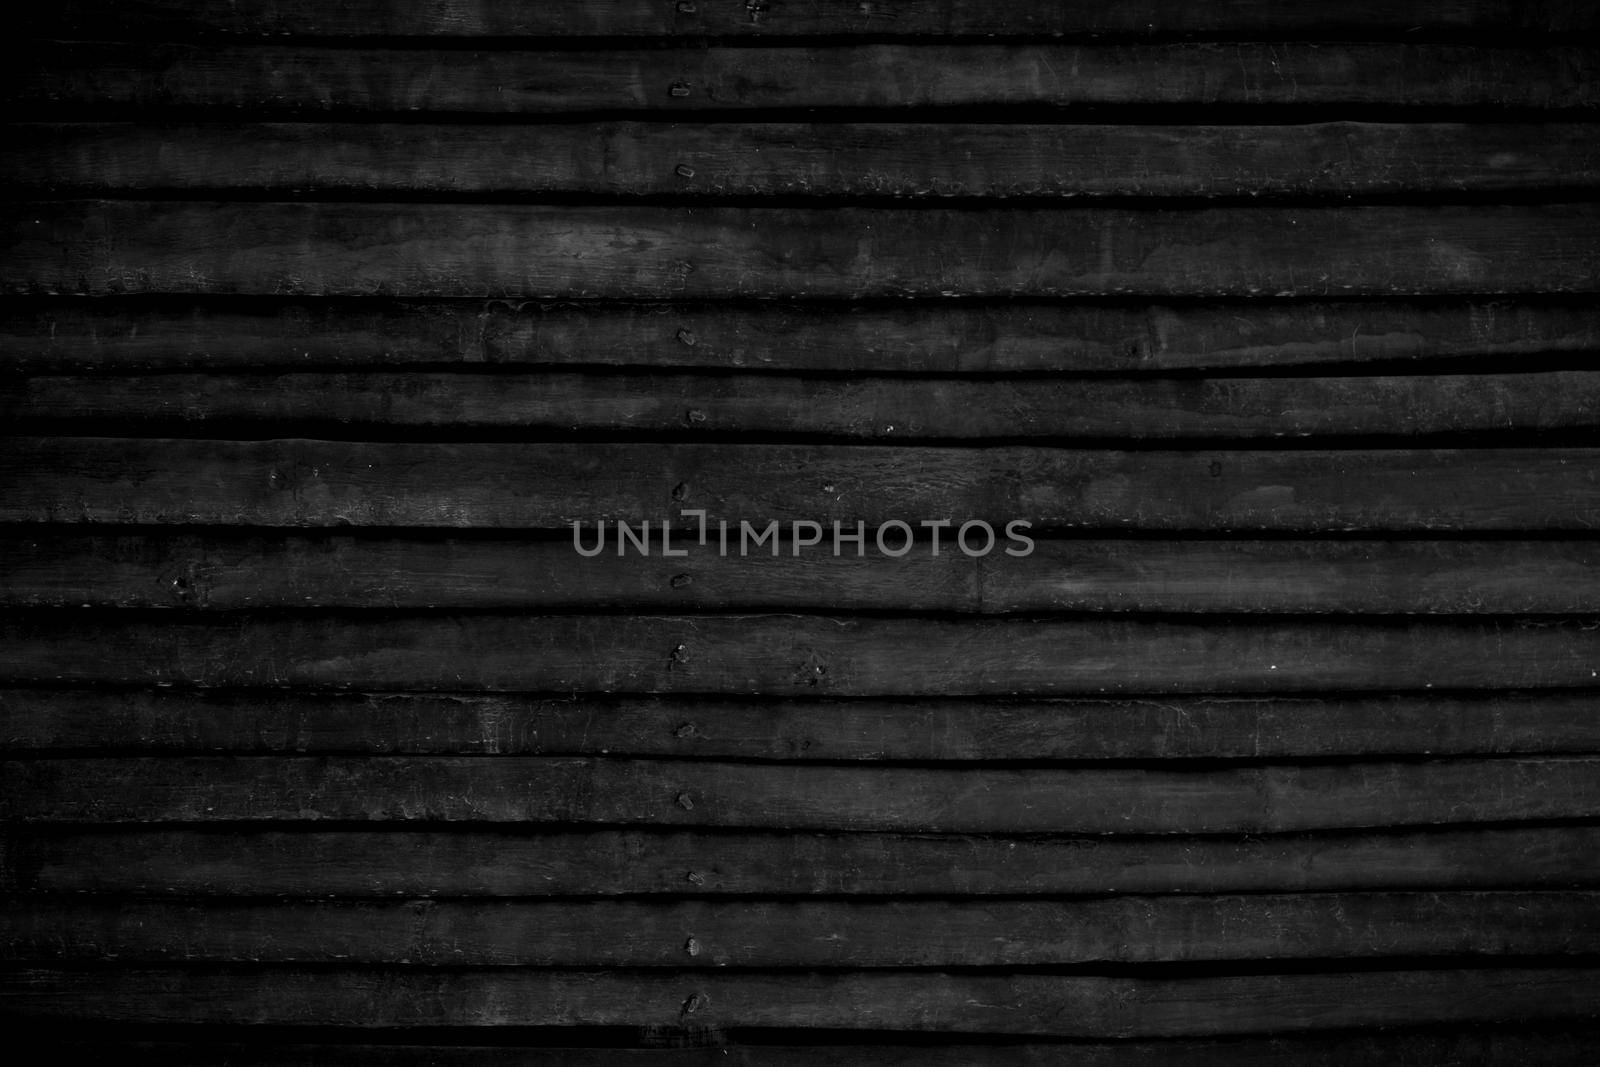 black wood bamboo horizontal for background texture.